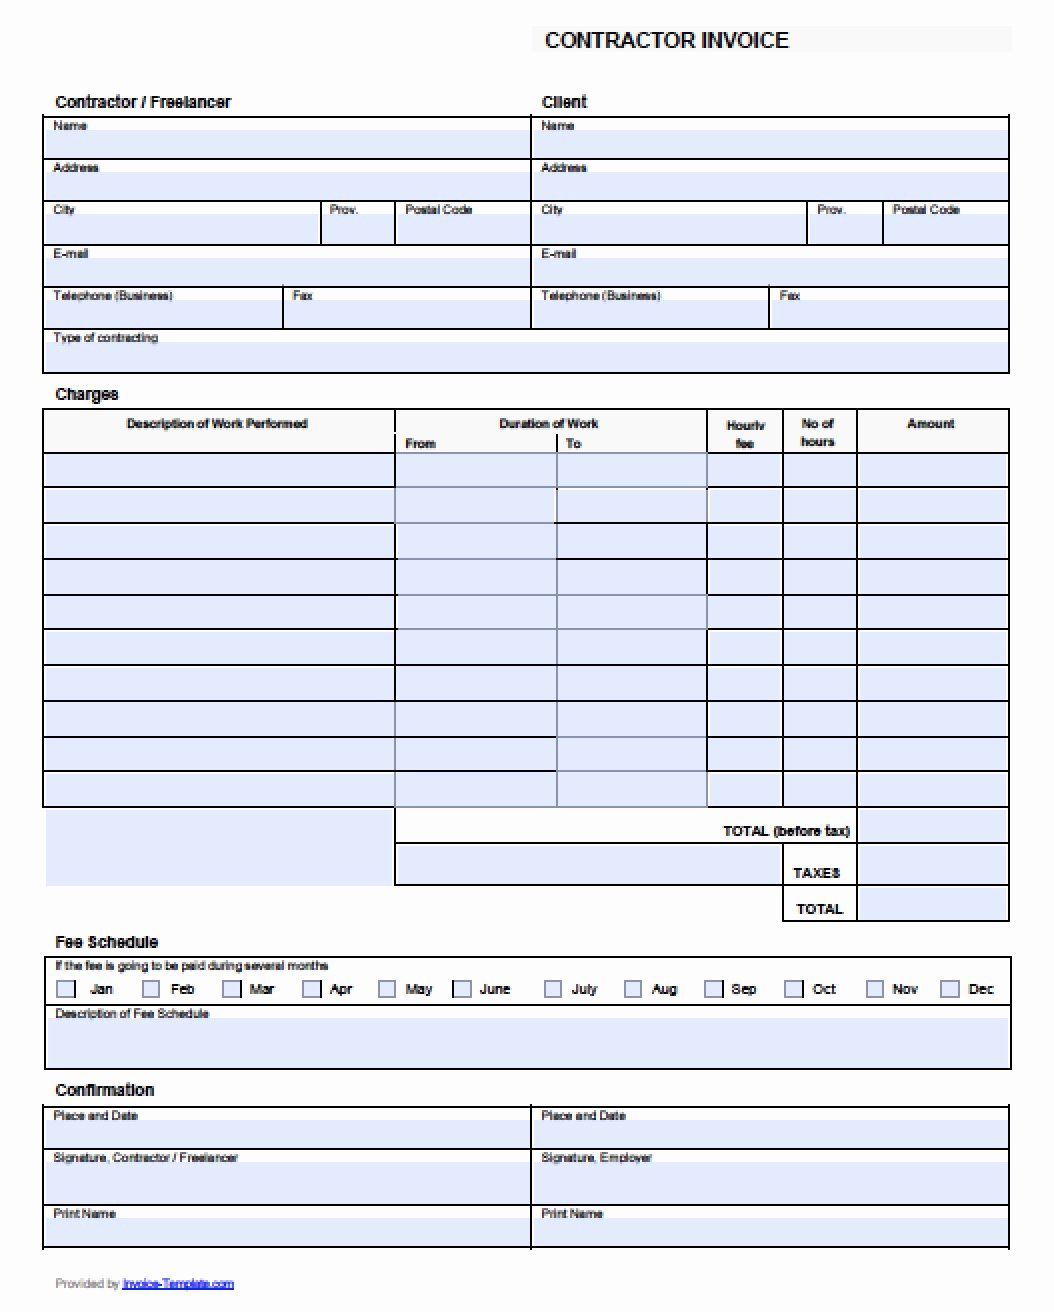 Contractor Invoice Template Word Lovely Free Contractor Invoice Template Excel Pdf